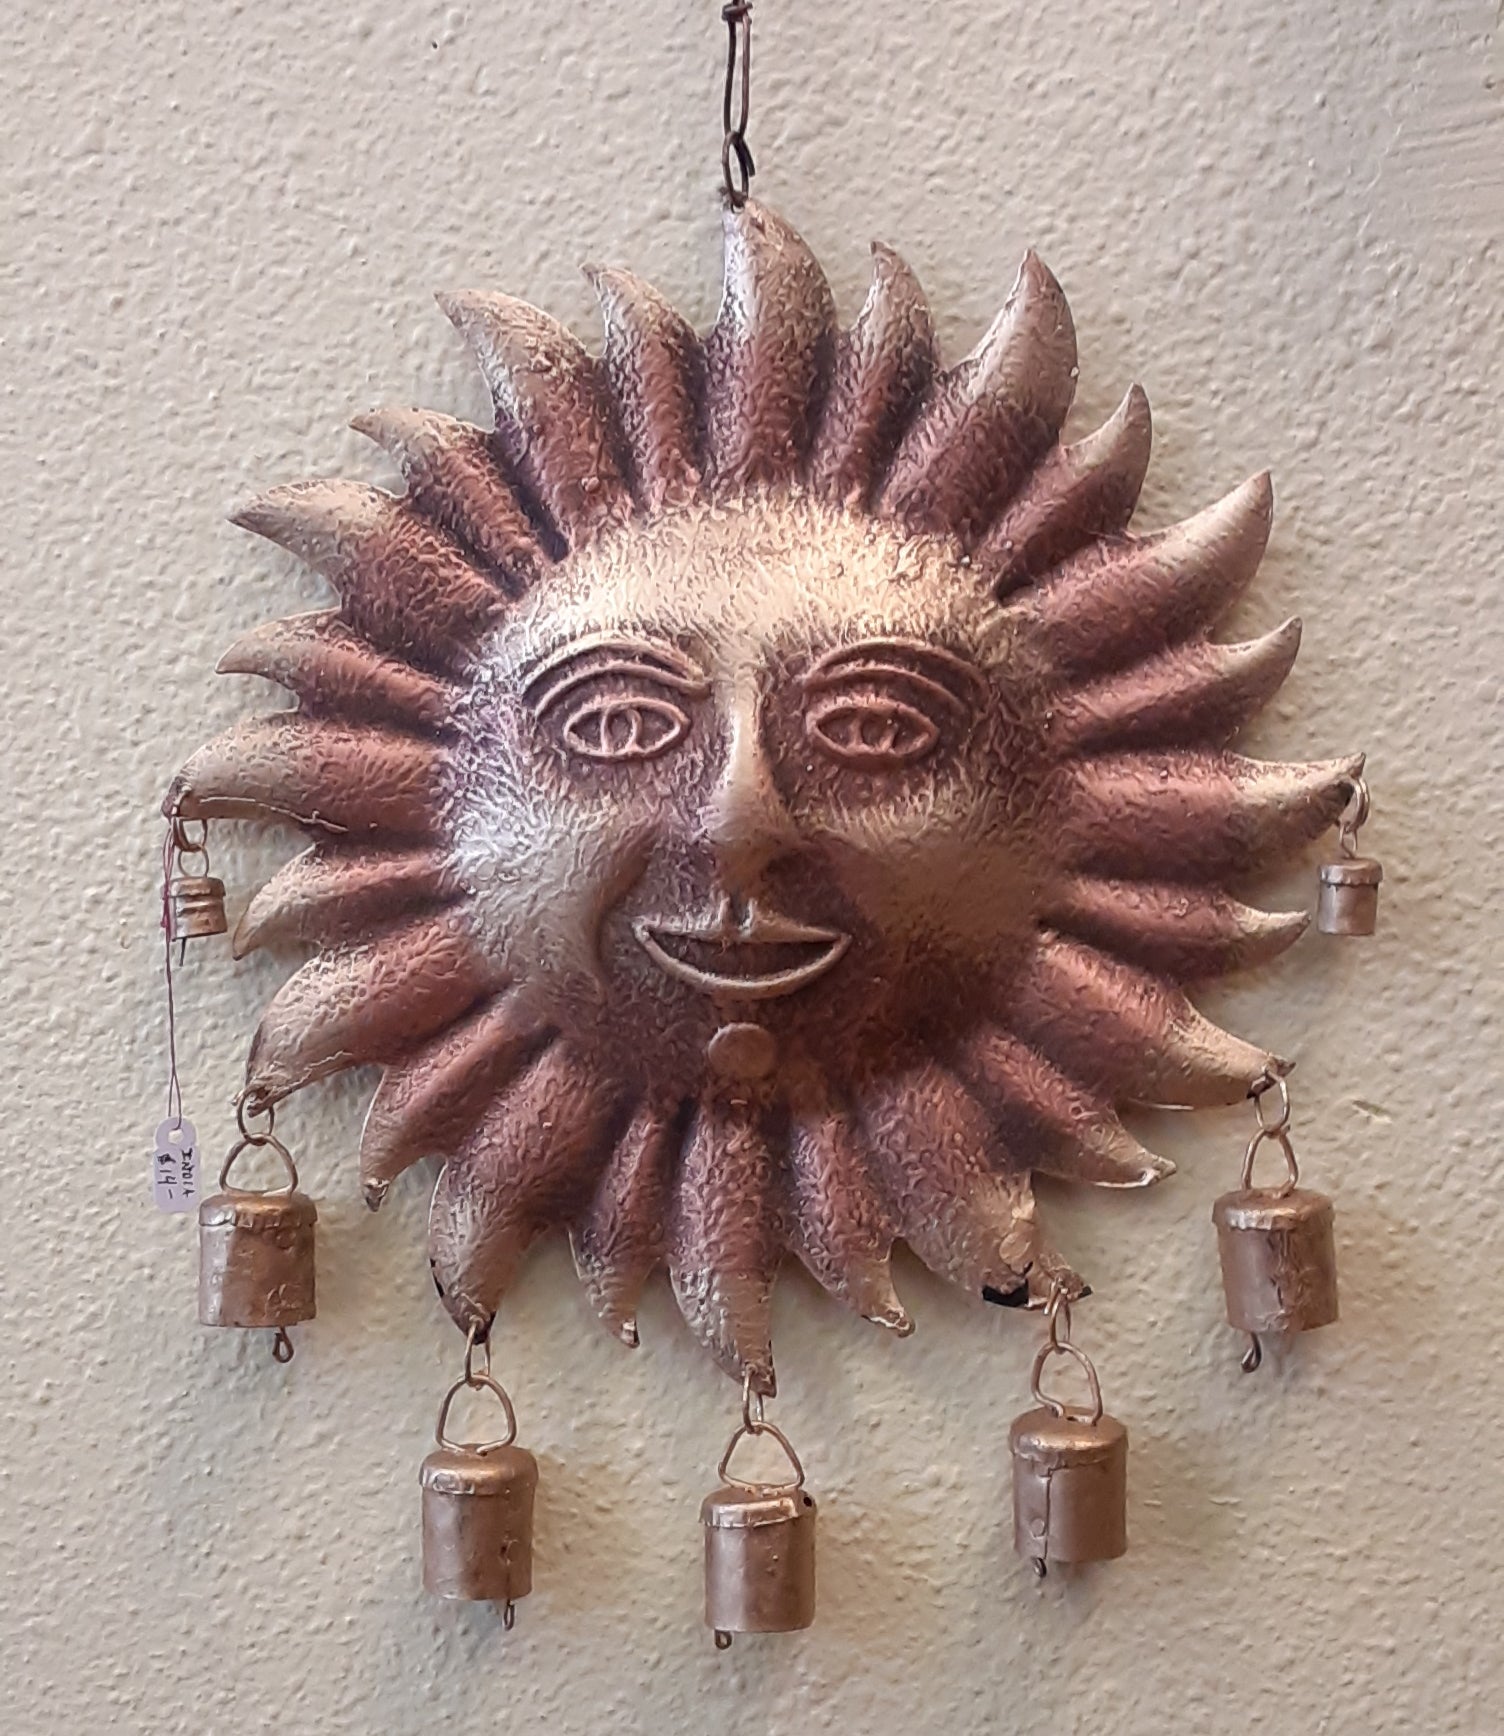 Sun Chimes from India